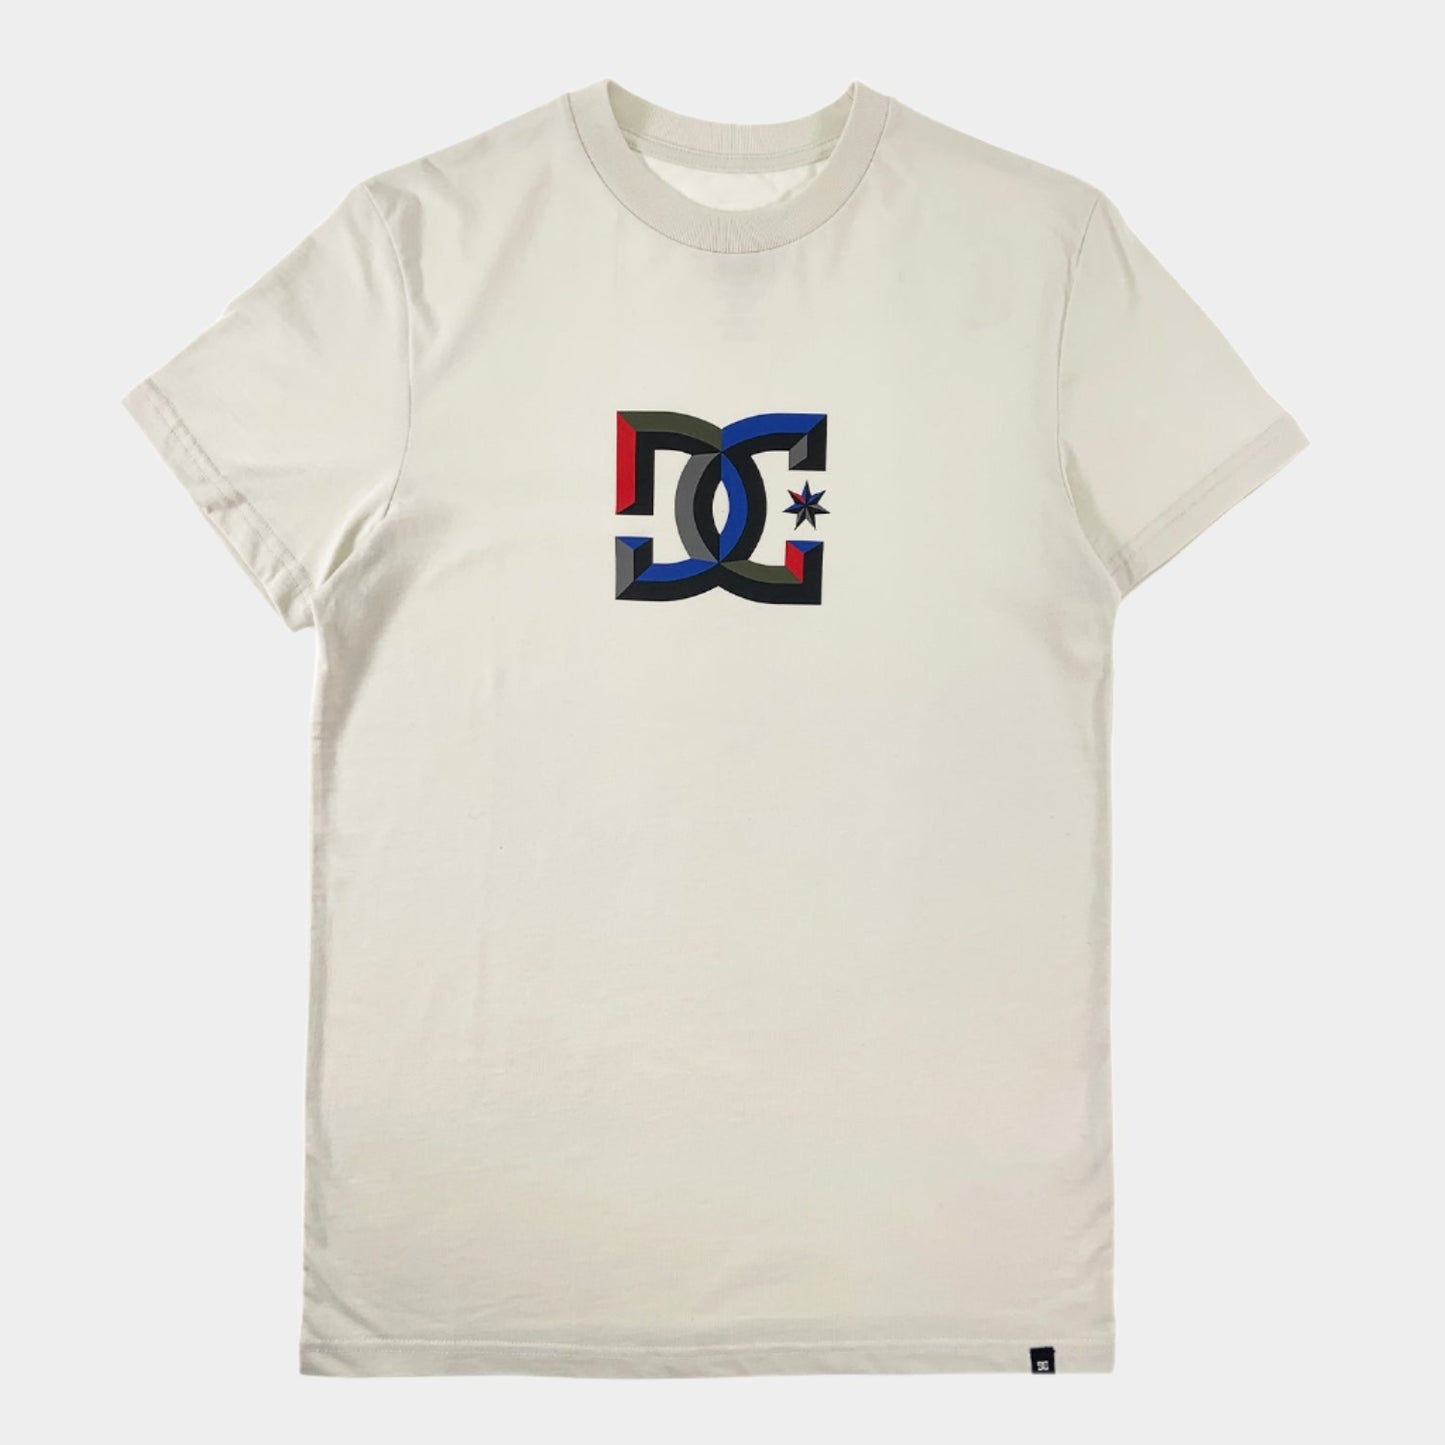 DC Shoes Star Dimensional T-shirt - Lily White - Prime Delux Store